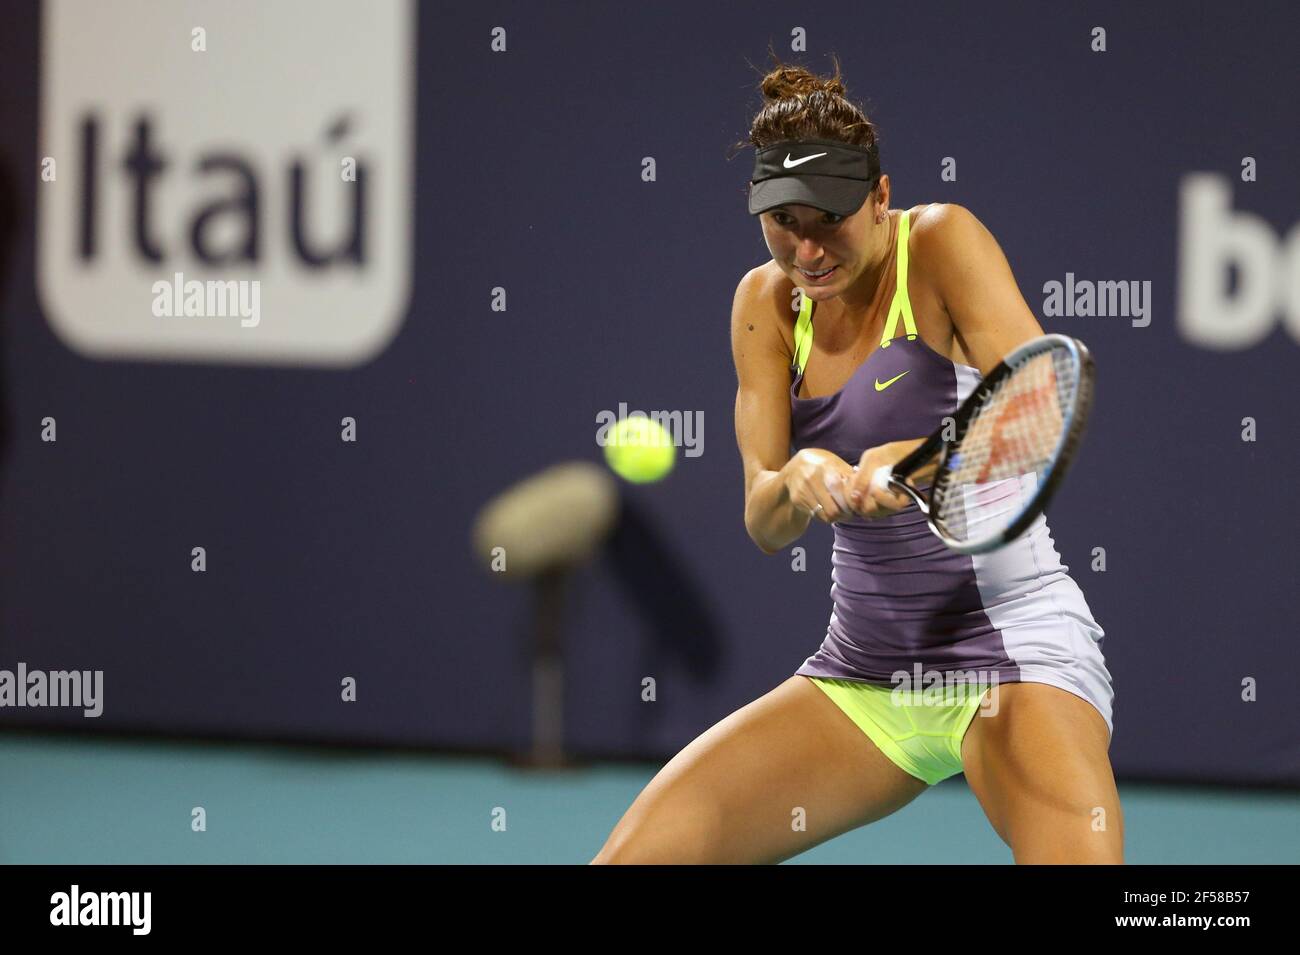 MIAMI GARDENS, FL - MARCH 24: Oceane Dodin seen playing on day 3 of the Miami Open on March 24, 2021 at Hard Rock Stadium in Miami Gardens, Florida People: Oceane Dodin Credit: Storms Media Group/Alamy Live News Stock Photo